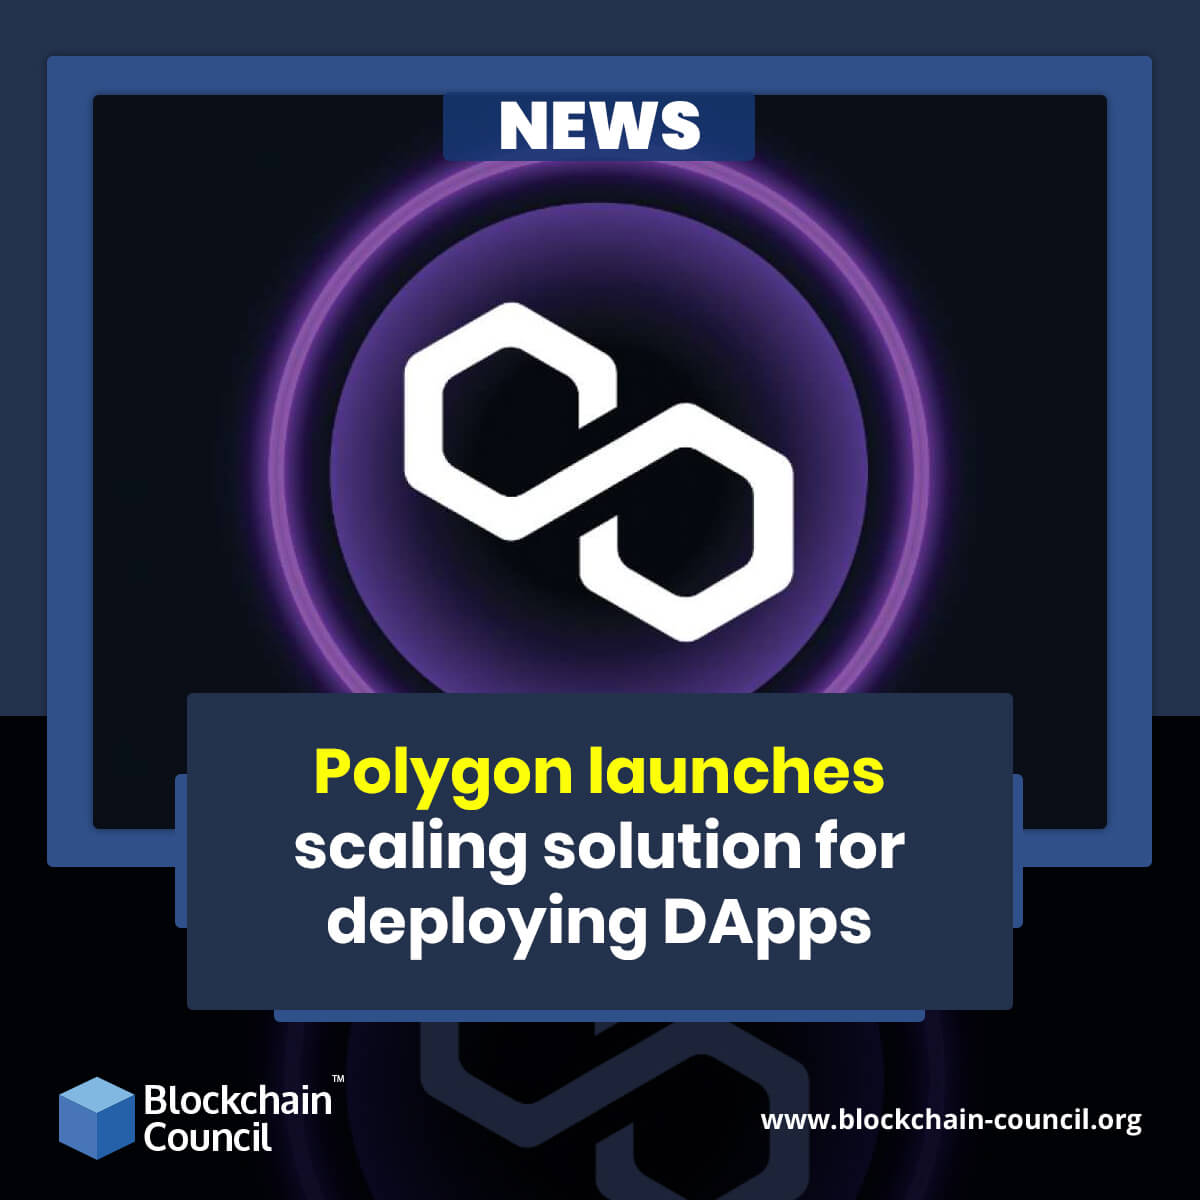 Polygon launches scaling solution for deploying DApps